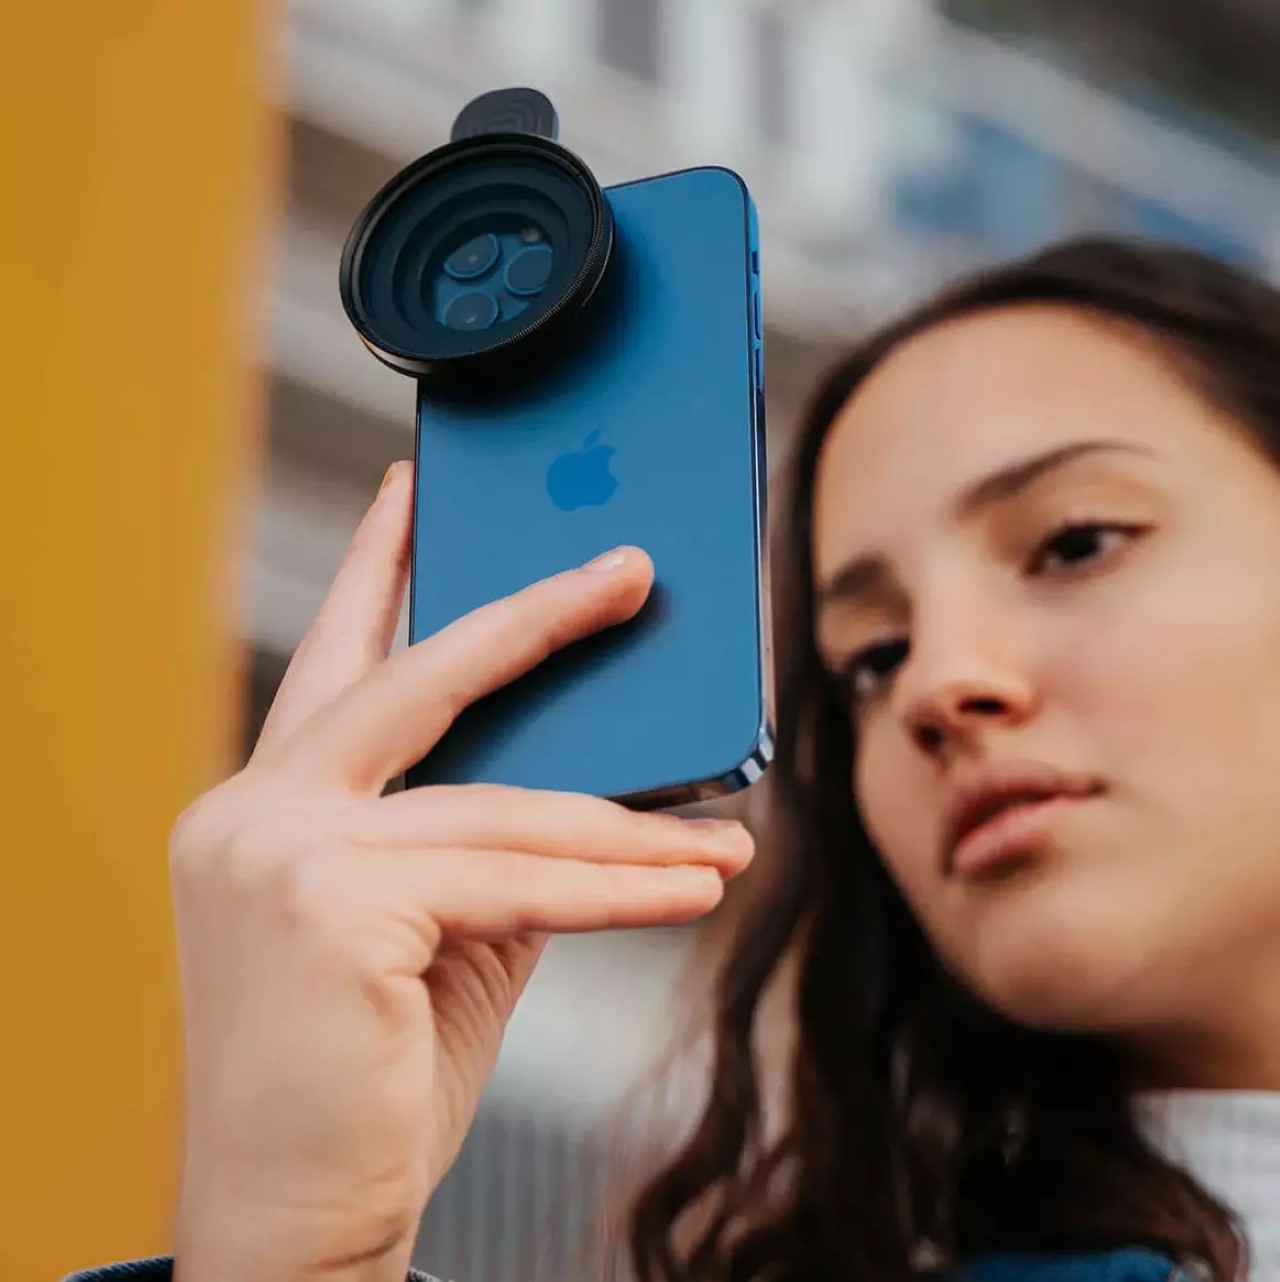 Sandmarc’s clip-on polarizing filter for the iPhone camera helps reduce glare to make your photos pop